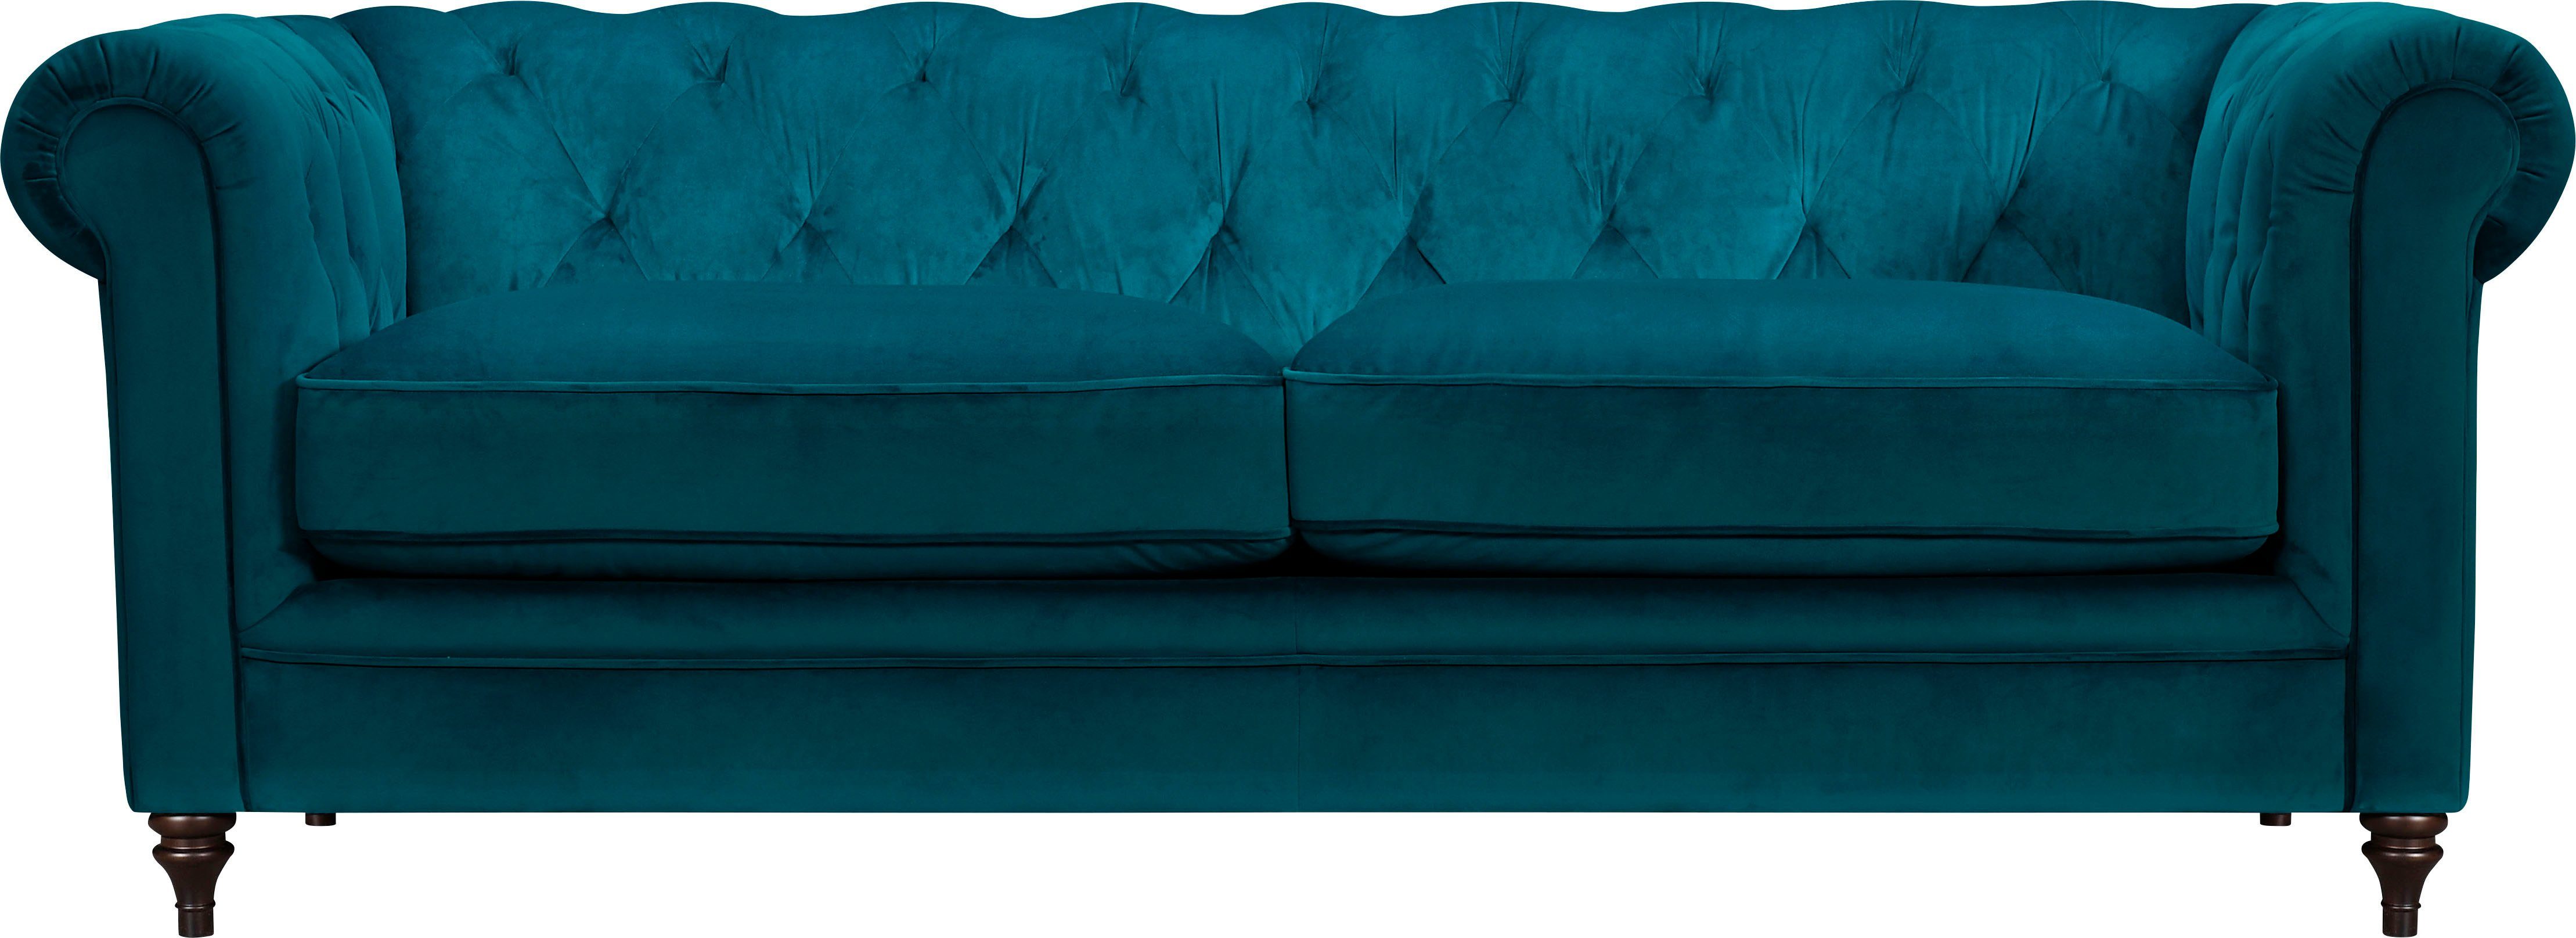 Premium collection by Home affaire Chesterfield-bank Chambal met klassieke capitonnage